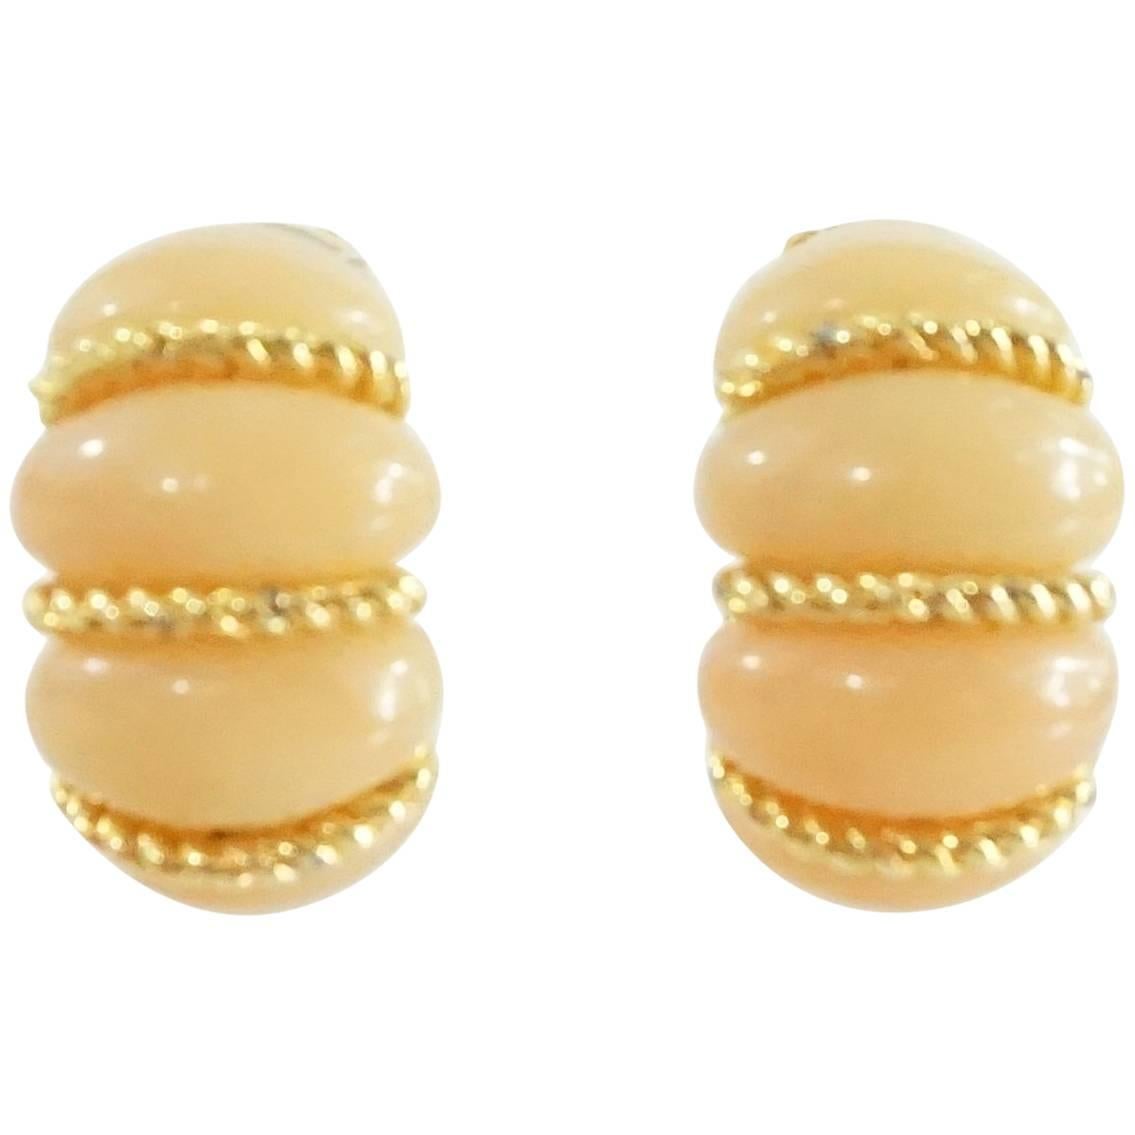 Kenneth Jay Lane Peach and Gold Clip Earrings